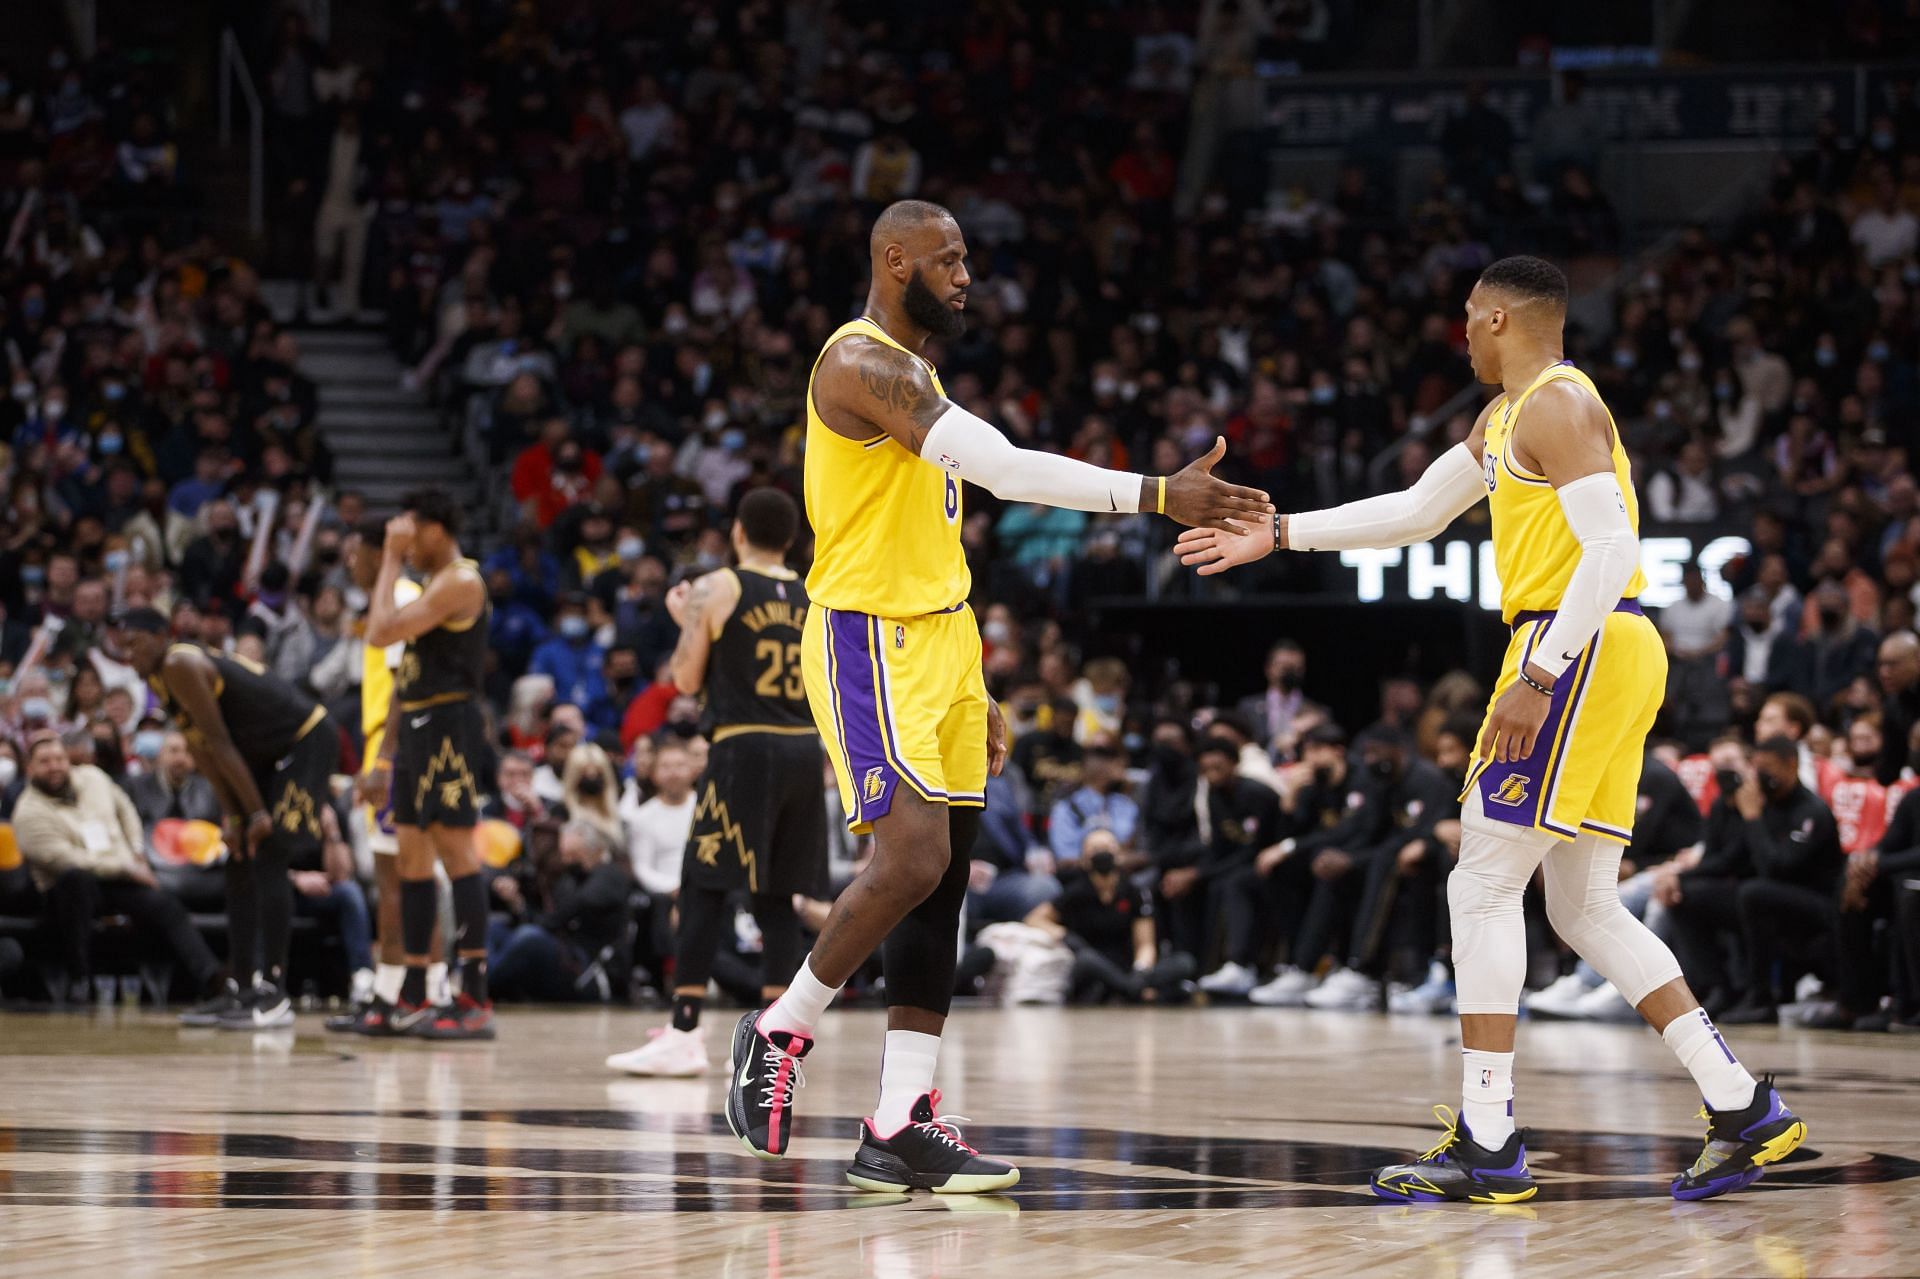 LeBron James and Russell Westbrook came up big at crunch time to help the LA Lakers beat the Toronto Raptors on Friday